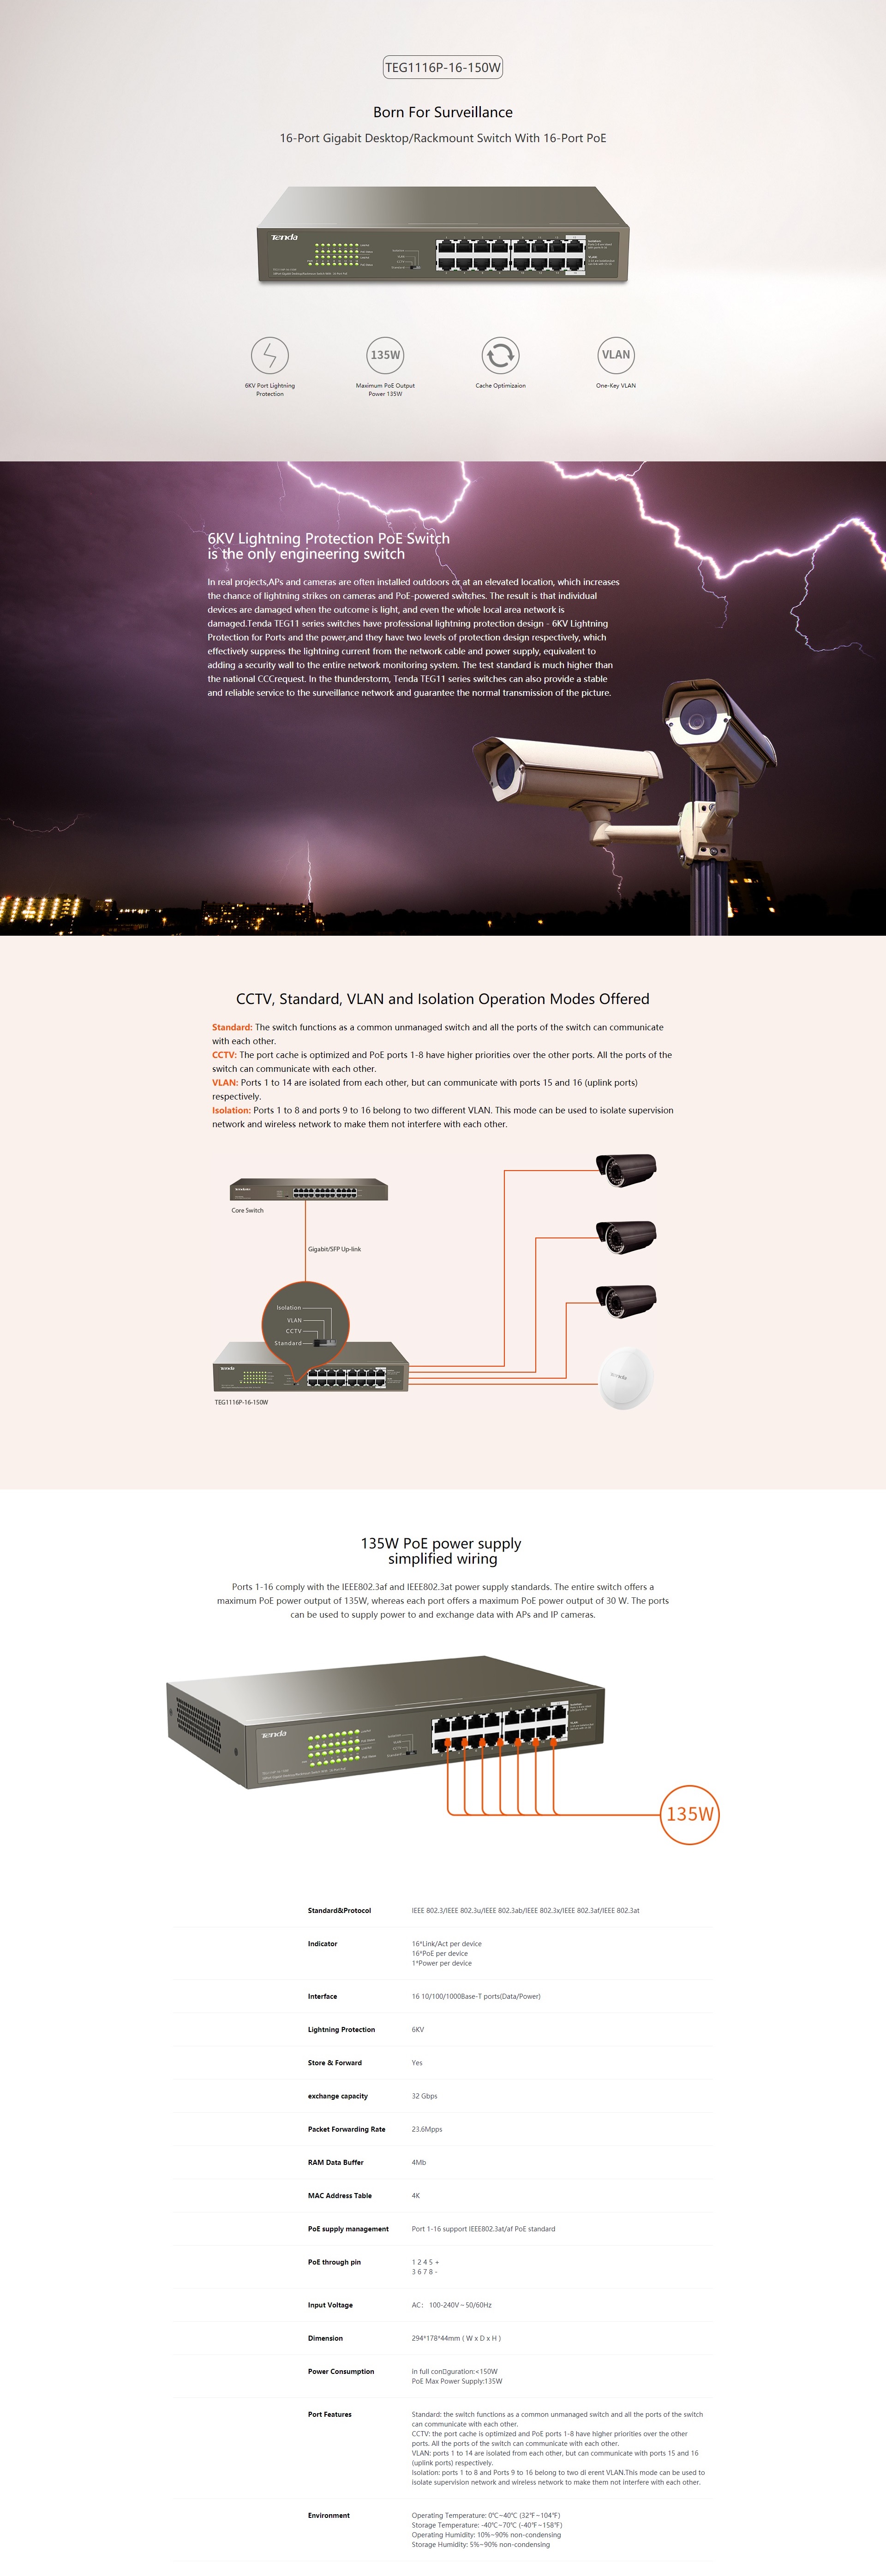 A large marketing image providing additional information about the product Tenda TEG1116P-16-150W 1000M&PoE 16-Port Gigabit Ethernet Switch with 16-Port PoE - Additional alt info not provided